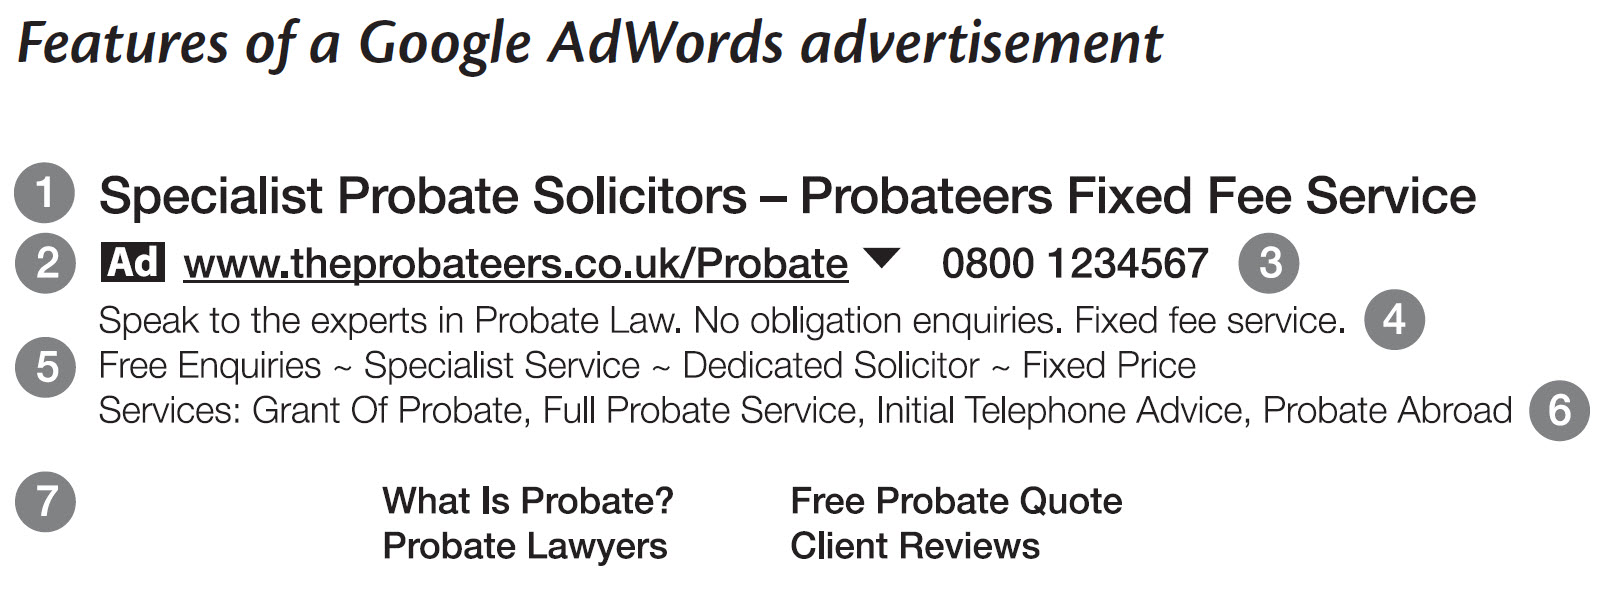 All the components of a good Google Adwords advertisement for law firms